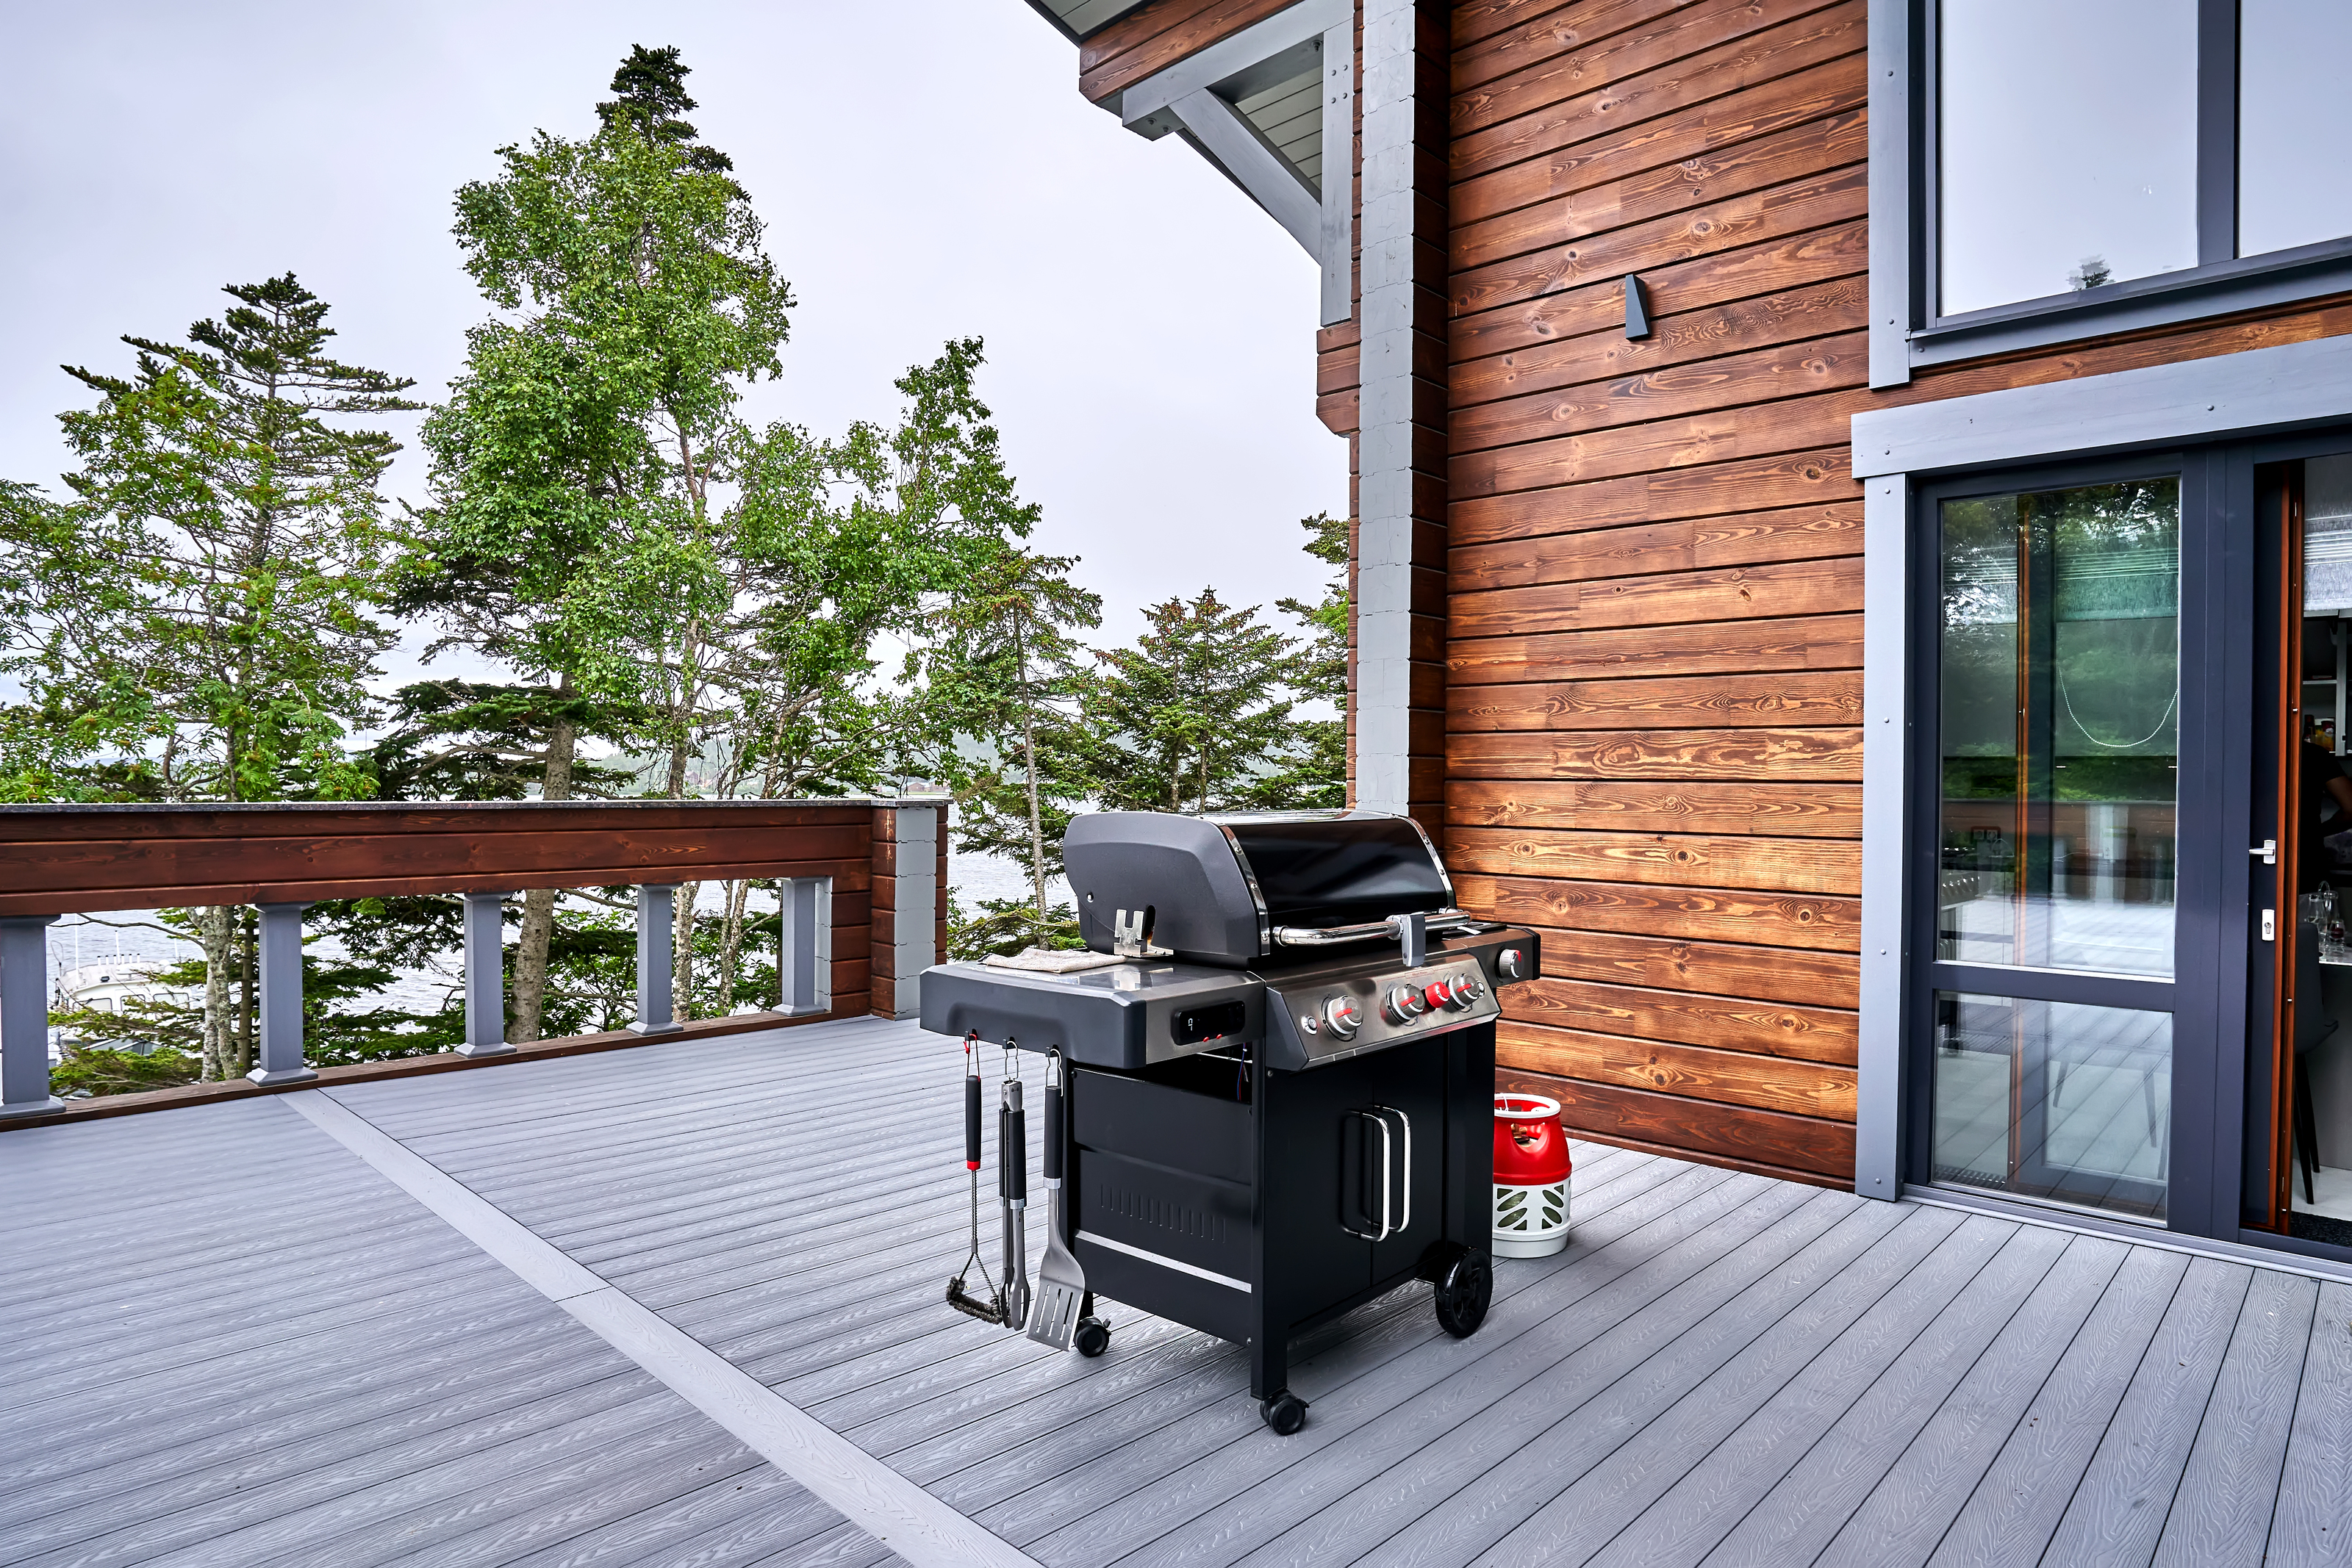 How do I connect a natural gas grill to my house?